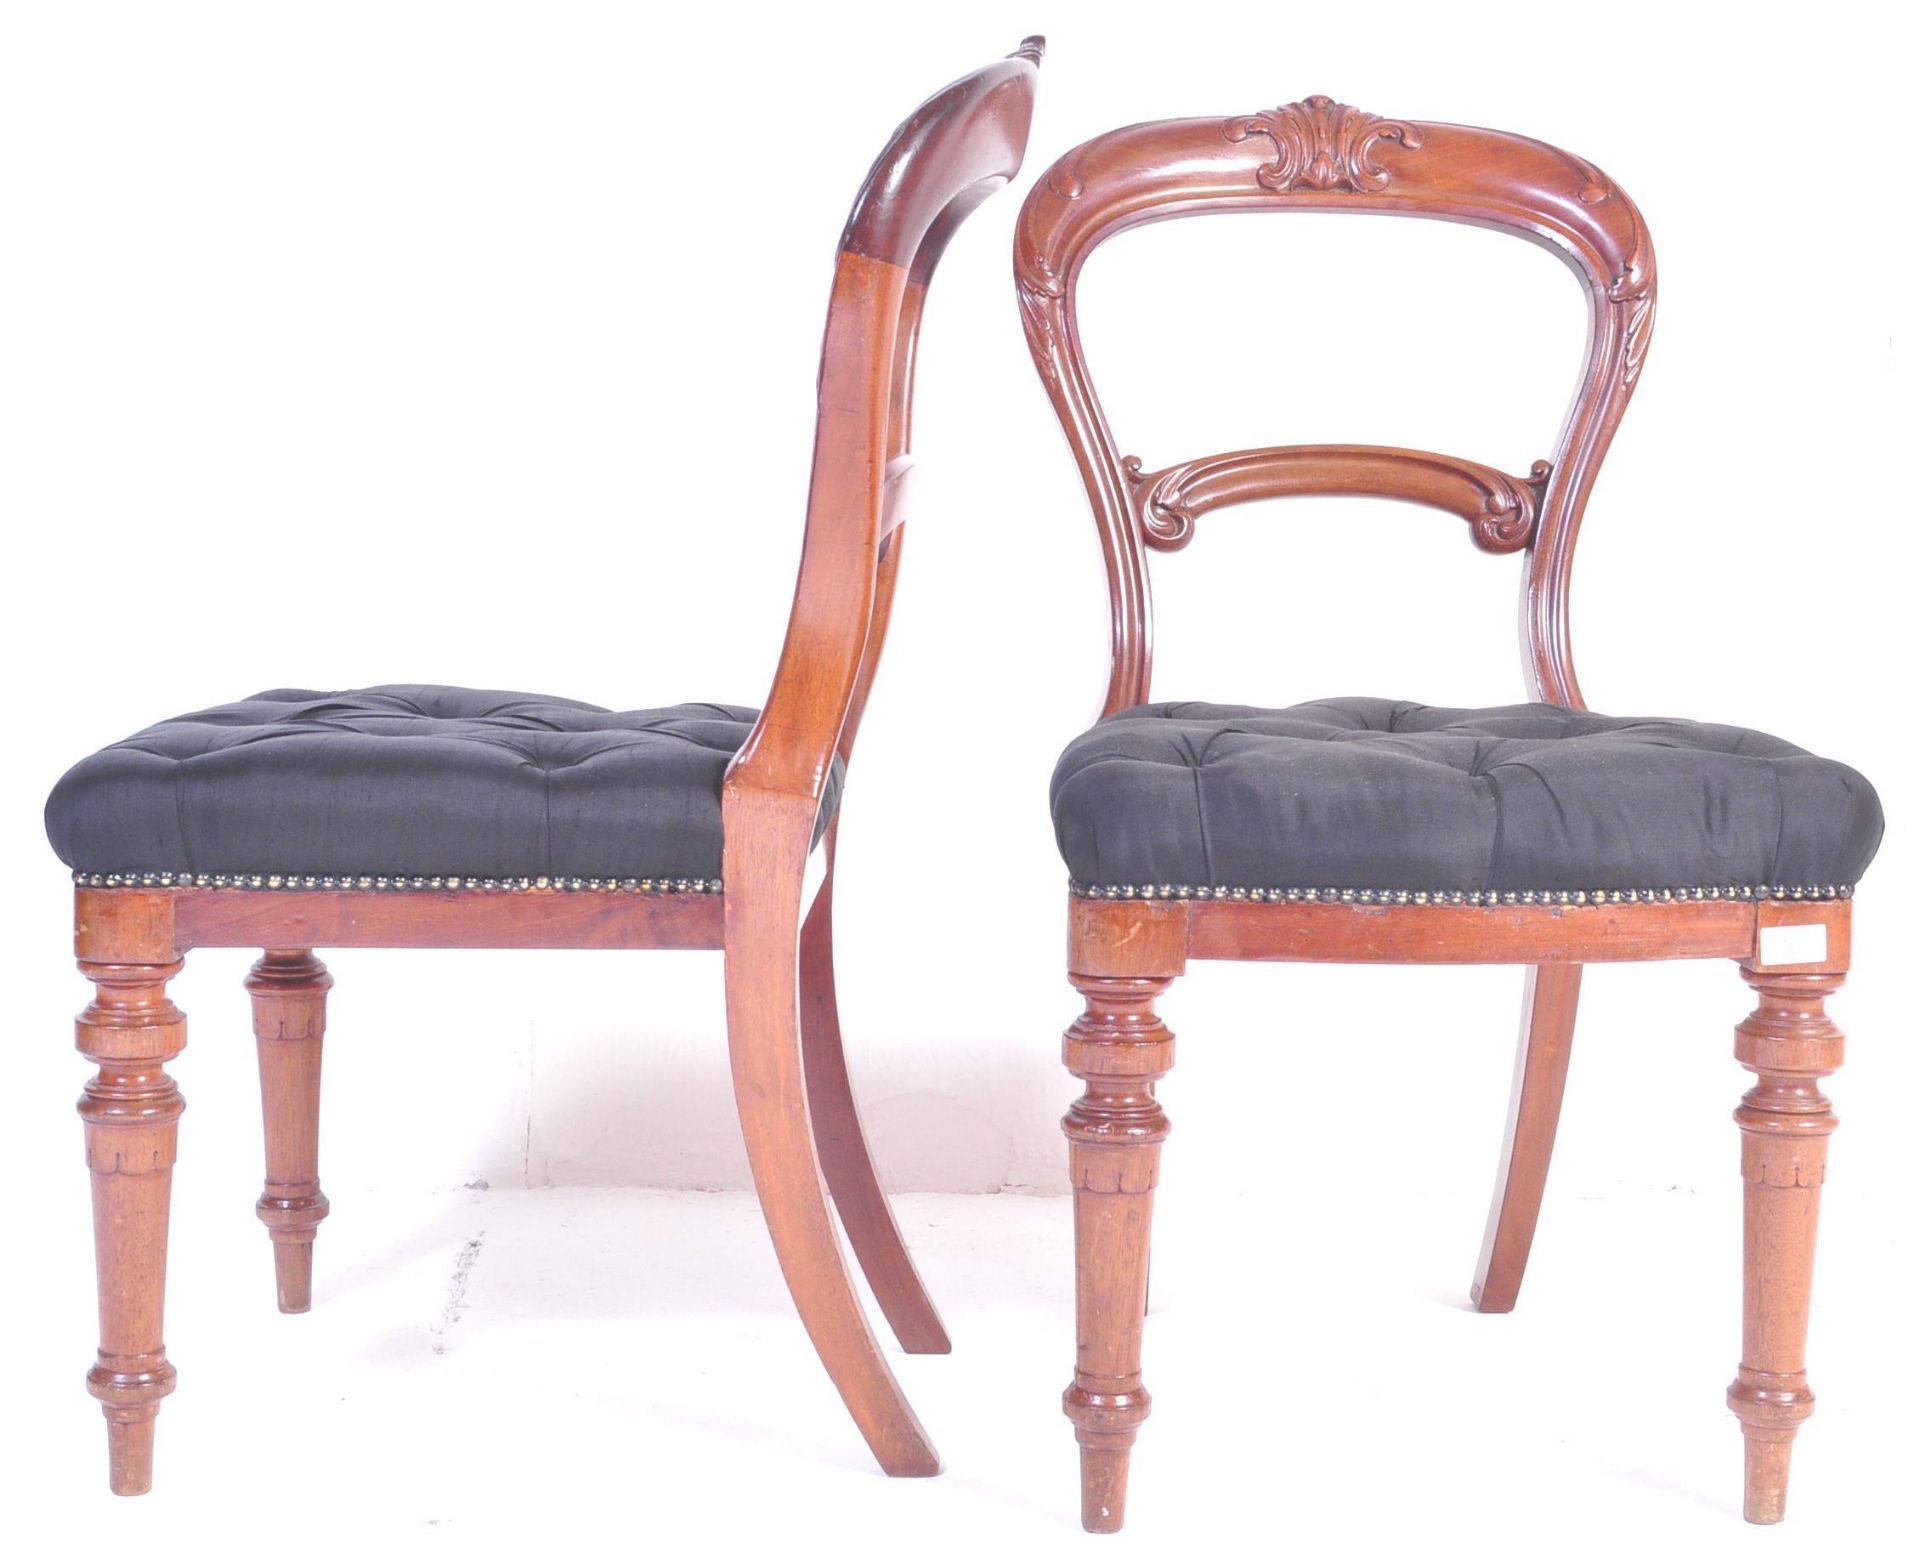 PAIR OF 19TH CENTURY VICTORIAN MAHOGANY DINING CHAIRS - Image 2 of 8